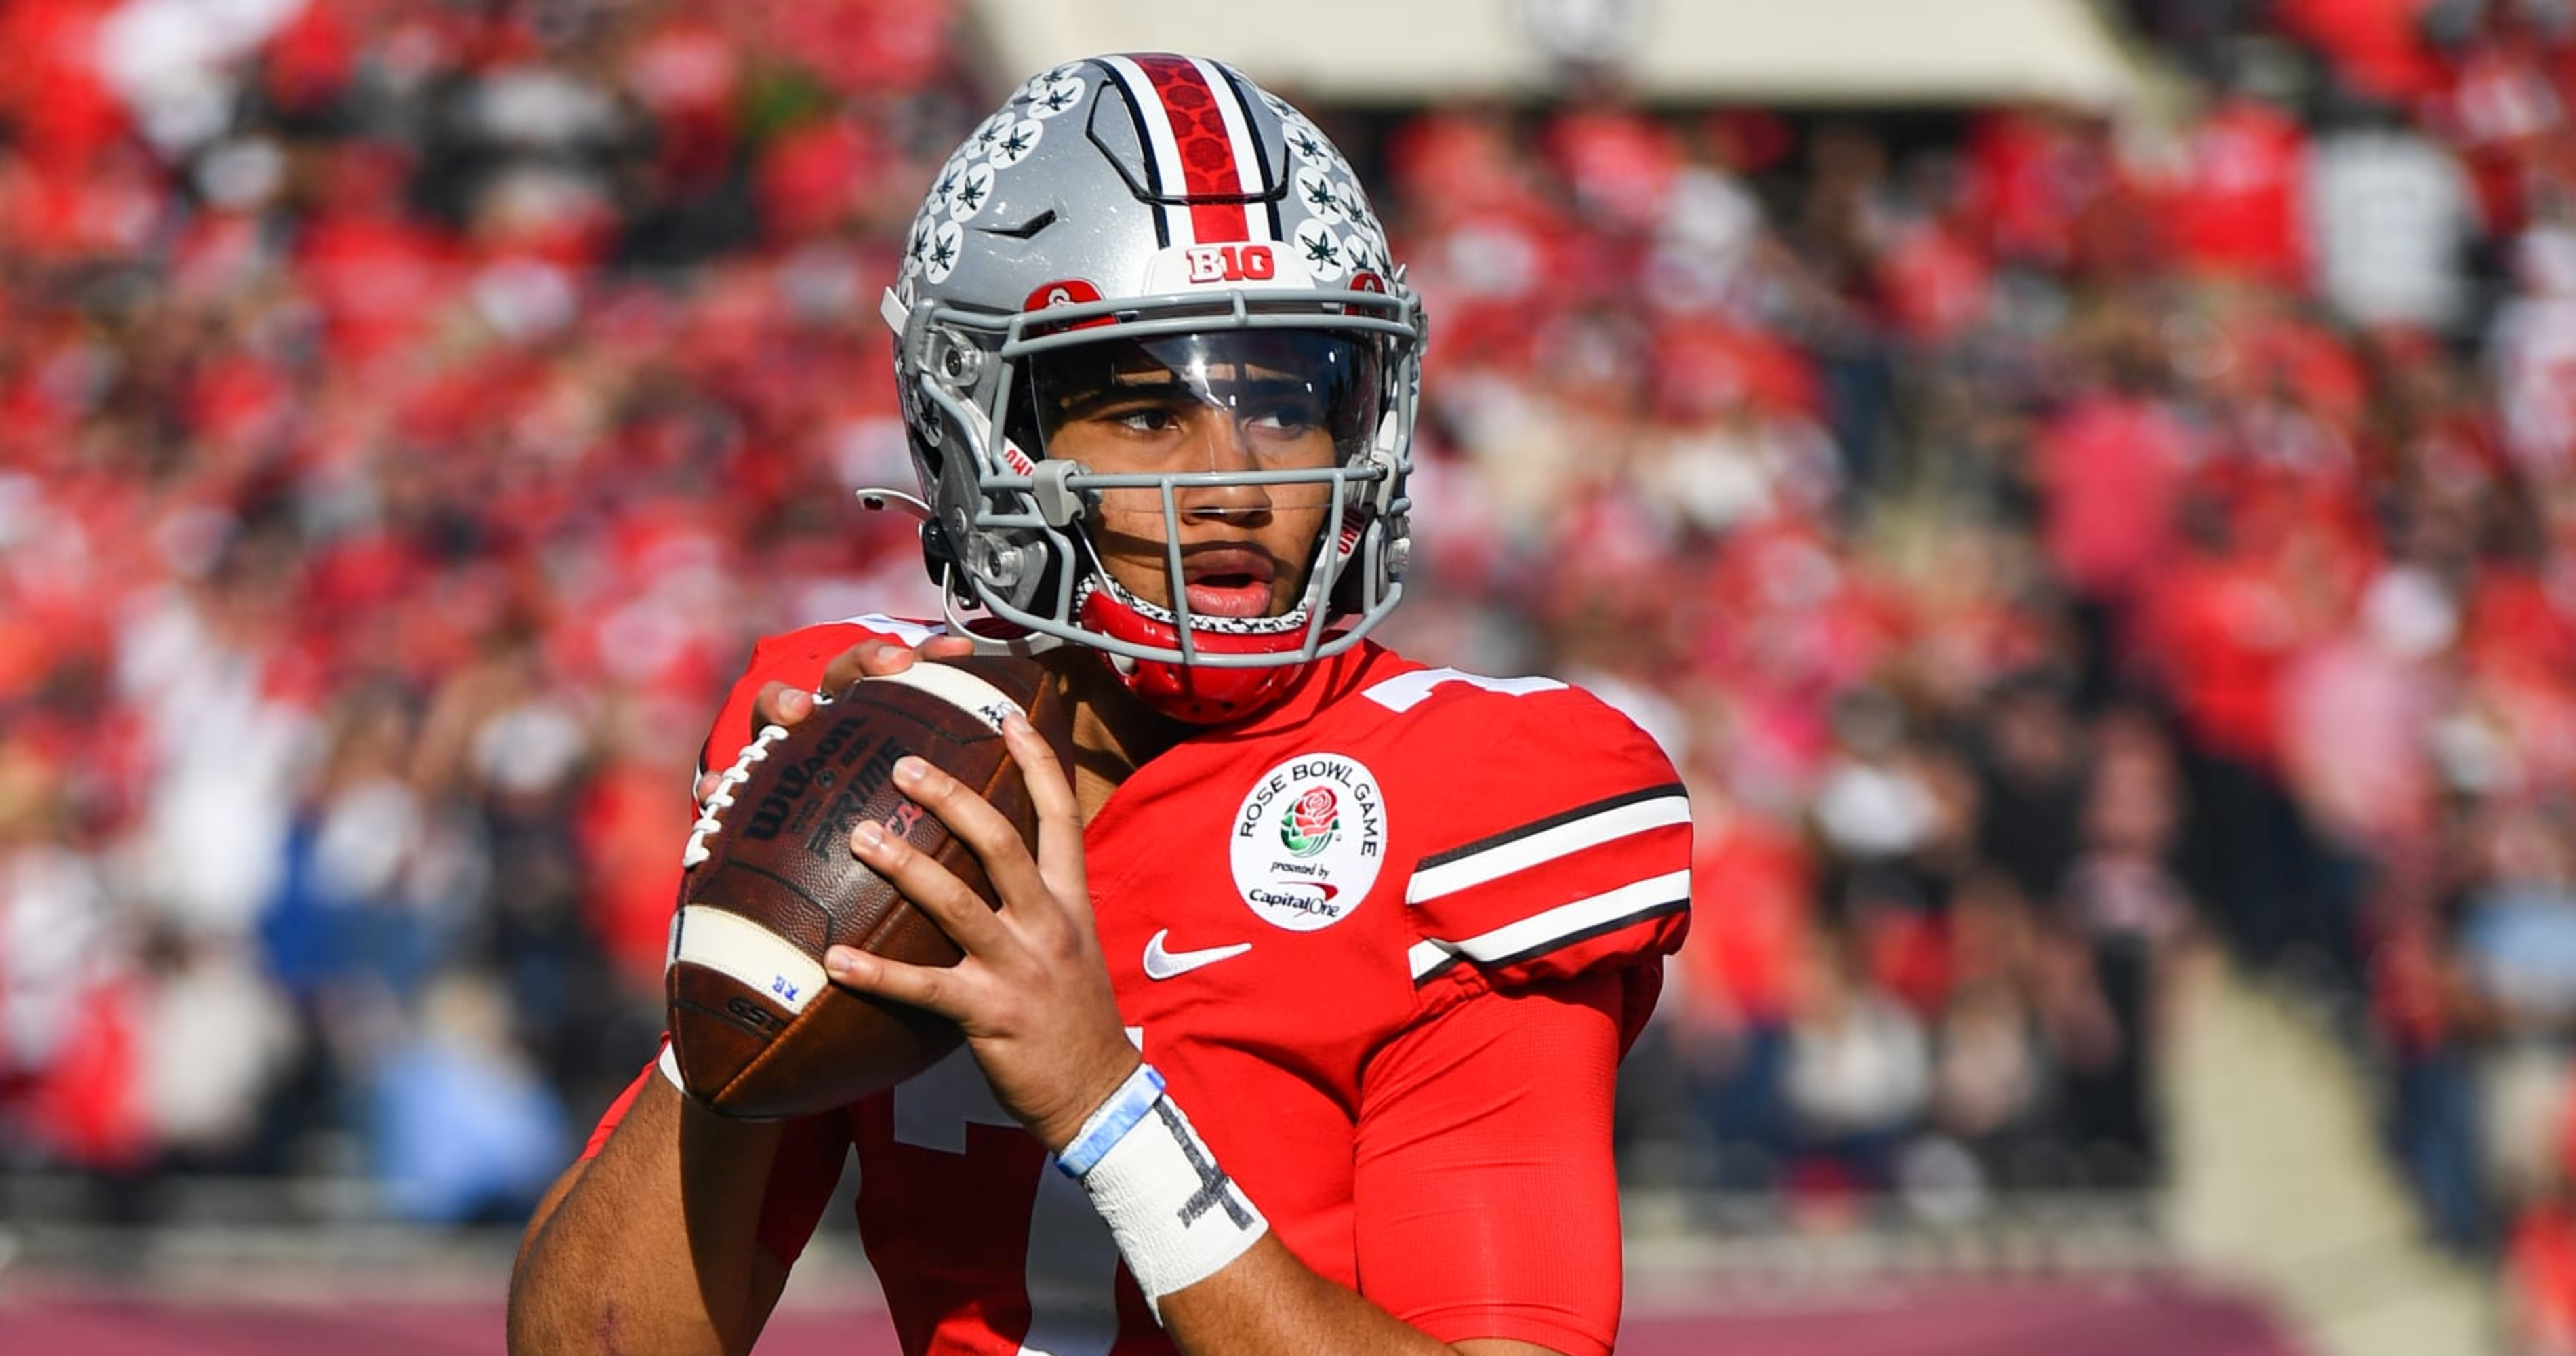 Ohio State's C.J. Stroud Voted QB1 in 2023 NFL Draft over Bryce Young in ESPN Po..